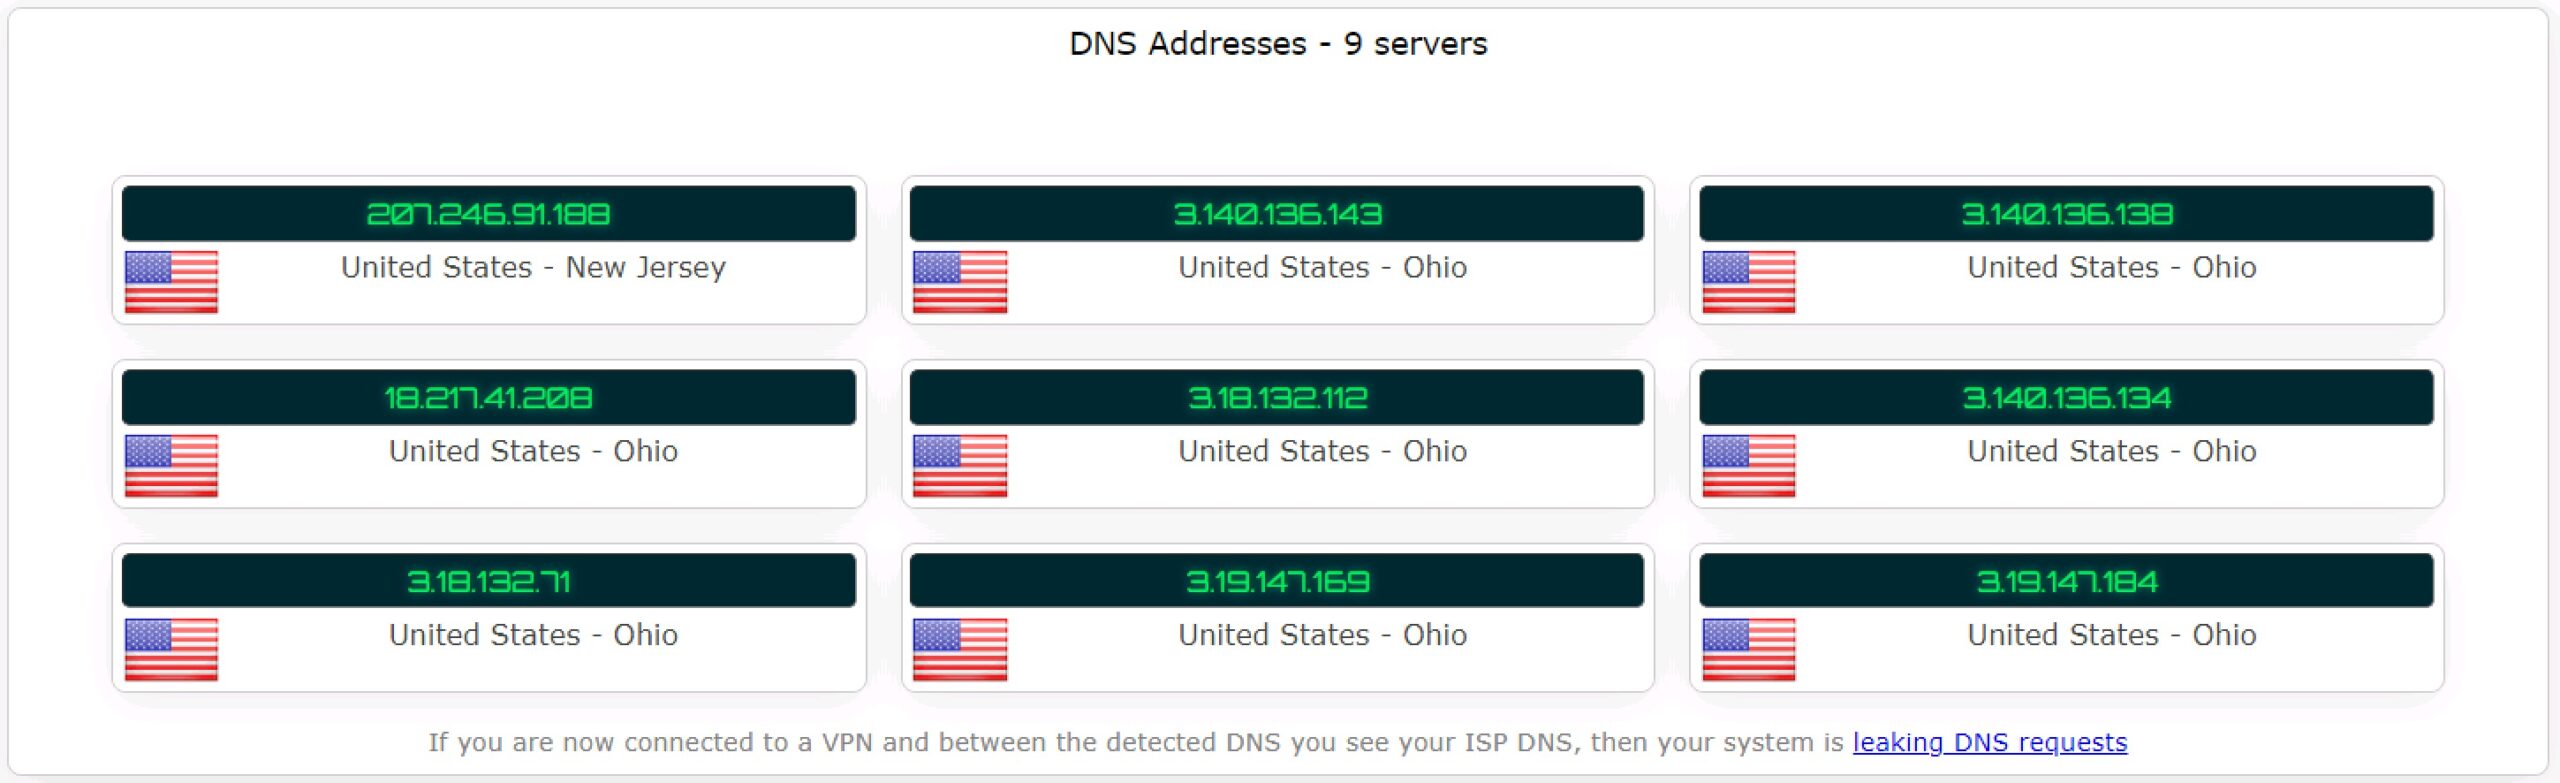 ClearVPN - DNS Test - With VPN 2